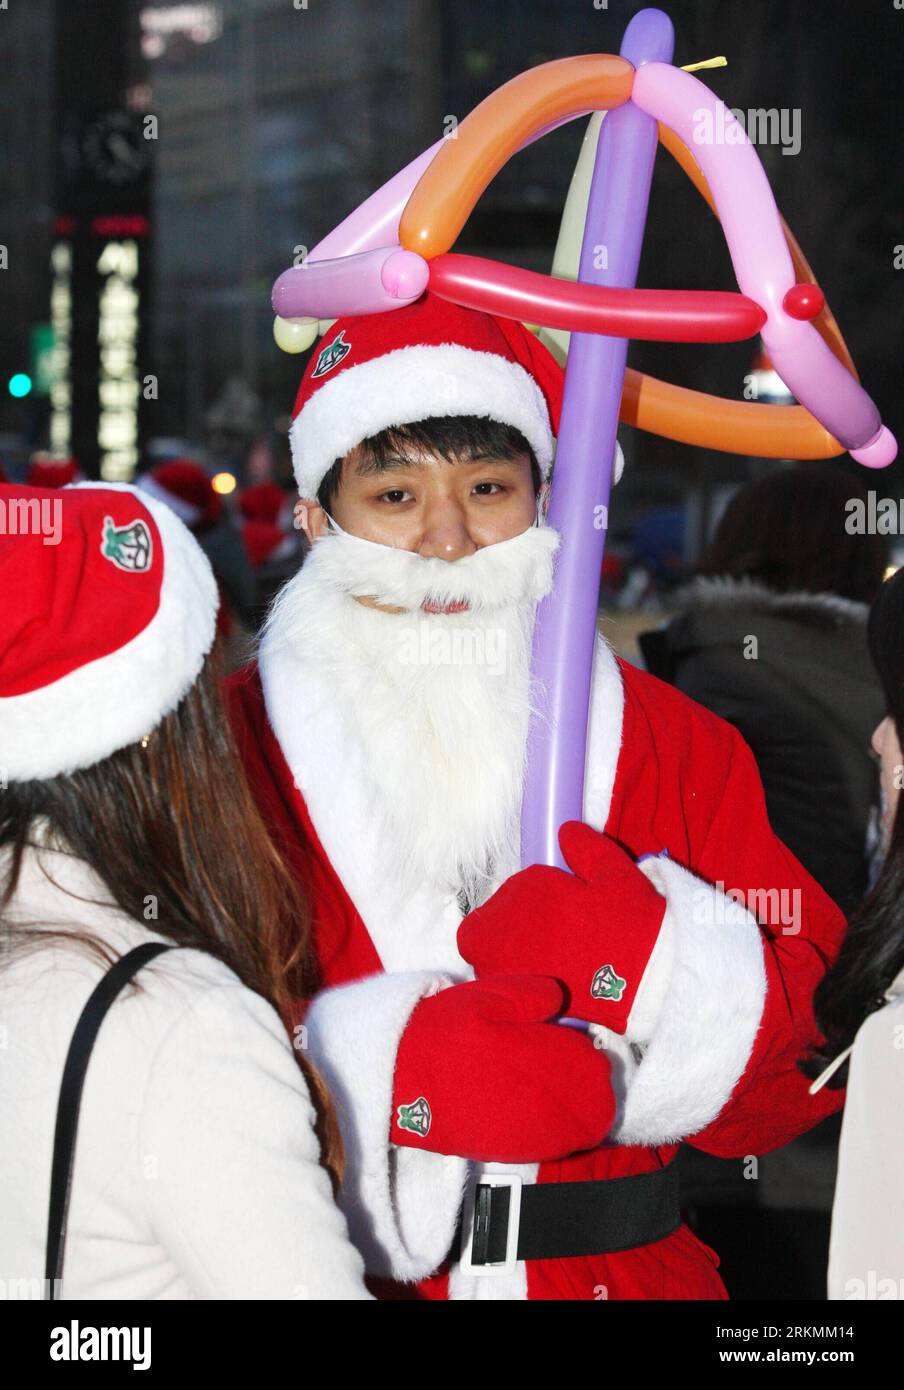 Bildnummer: 56784155  Datum: 23.12.2011  Copyright: imago/Xinhua (111223) -- SEOUL, Dec. 23, 2011 (Xinhua) -- A South Korean student dressed as Santa Claus takes part in an event celebrating the upcoming Christmas in Seoul, capital of South Korea, on Dec. 23, 2011. (Xinhua/Park Jin Hee)(zjl) SOUTH KOREA-SEOUL-SANTA CLAUS PUBLICATIONxNOTxINxCHN Gesellschaft Weihnachten Weihnachtsmänner x0x xst premiumd 2011 hoch      56784155 Date 23 12 2011 Copyright Imago XINHUA  Seoul DEC 23 2011 XINHUA a South Korean Student Dressed As Santa Claus Takes Part in to Event Celebrating The upcoming Christmas in Stock Photo